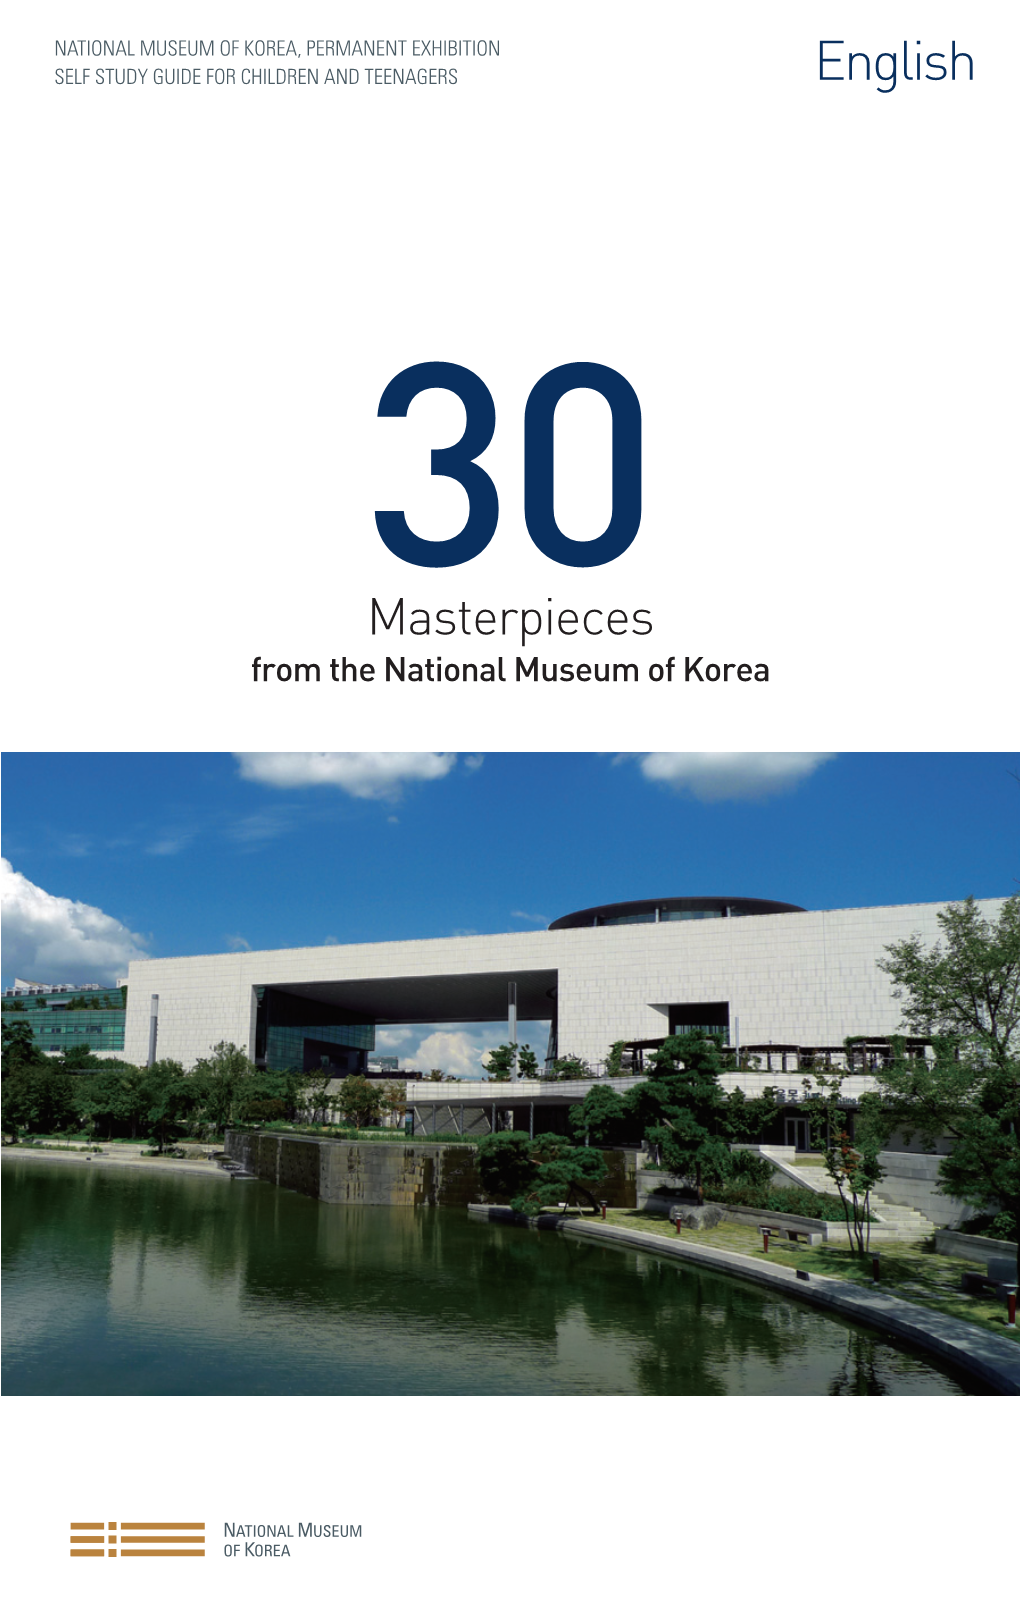 English 30 Masterpieces from the National Museum of Korea 26 25 24